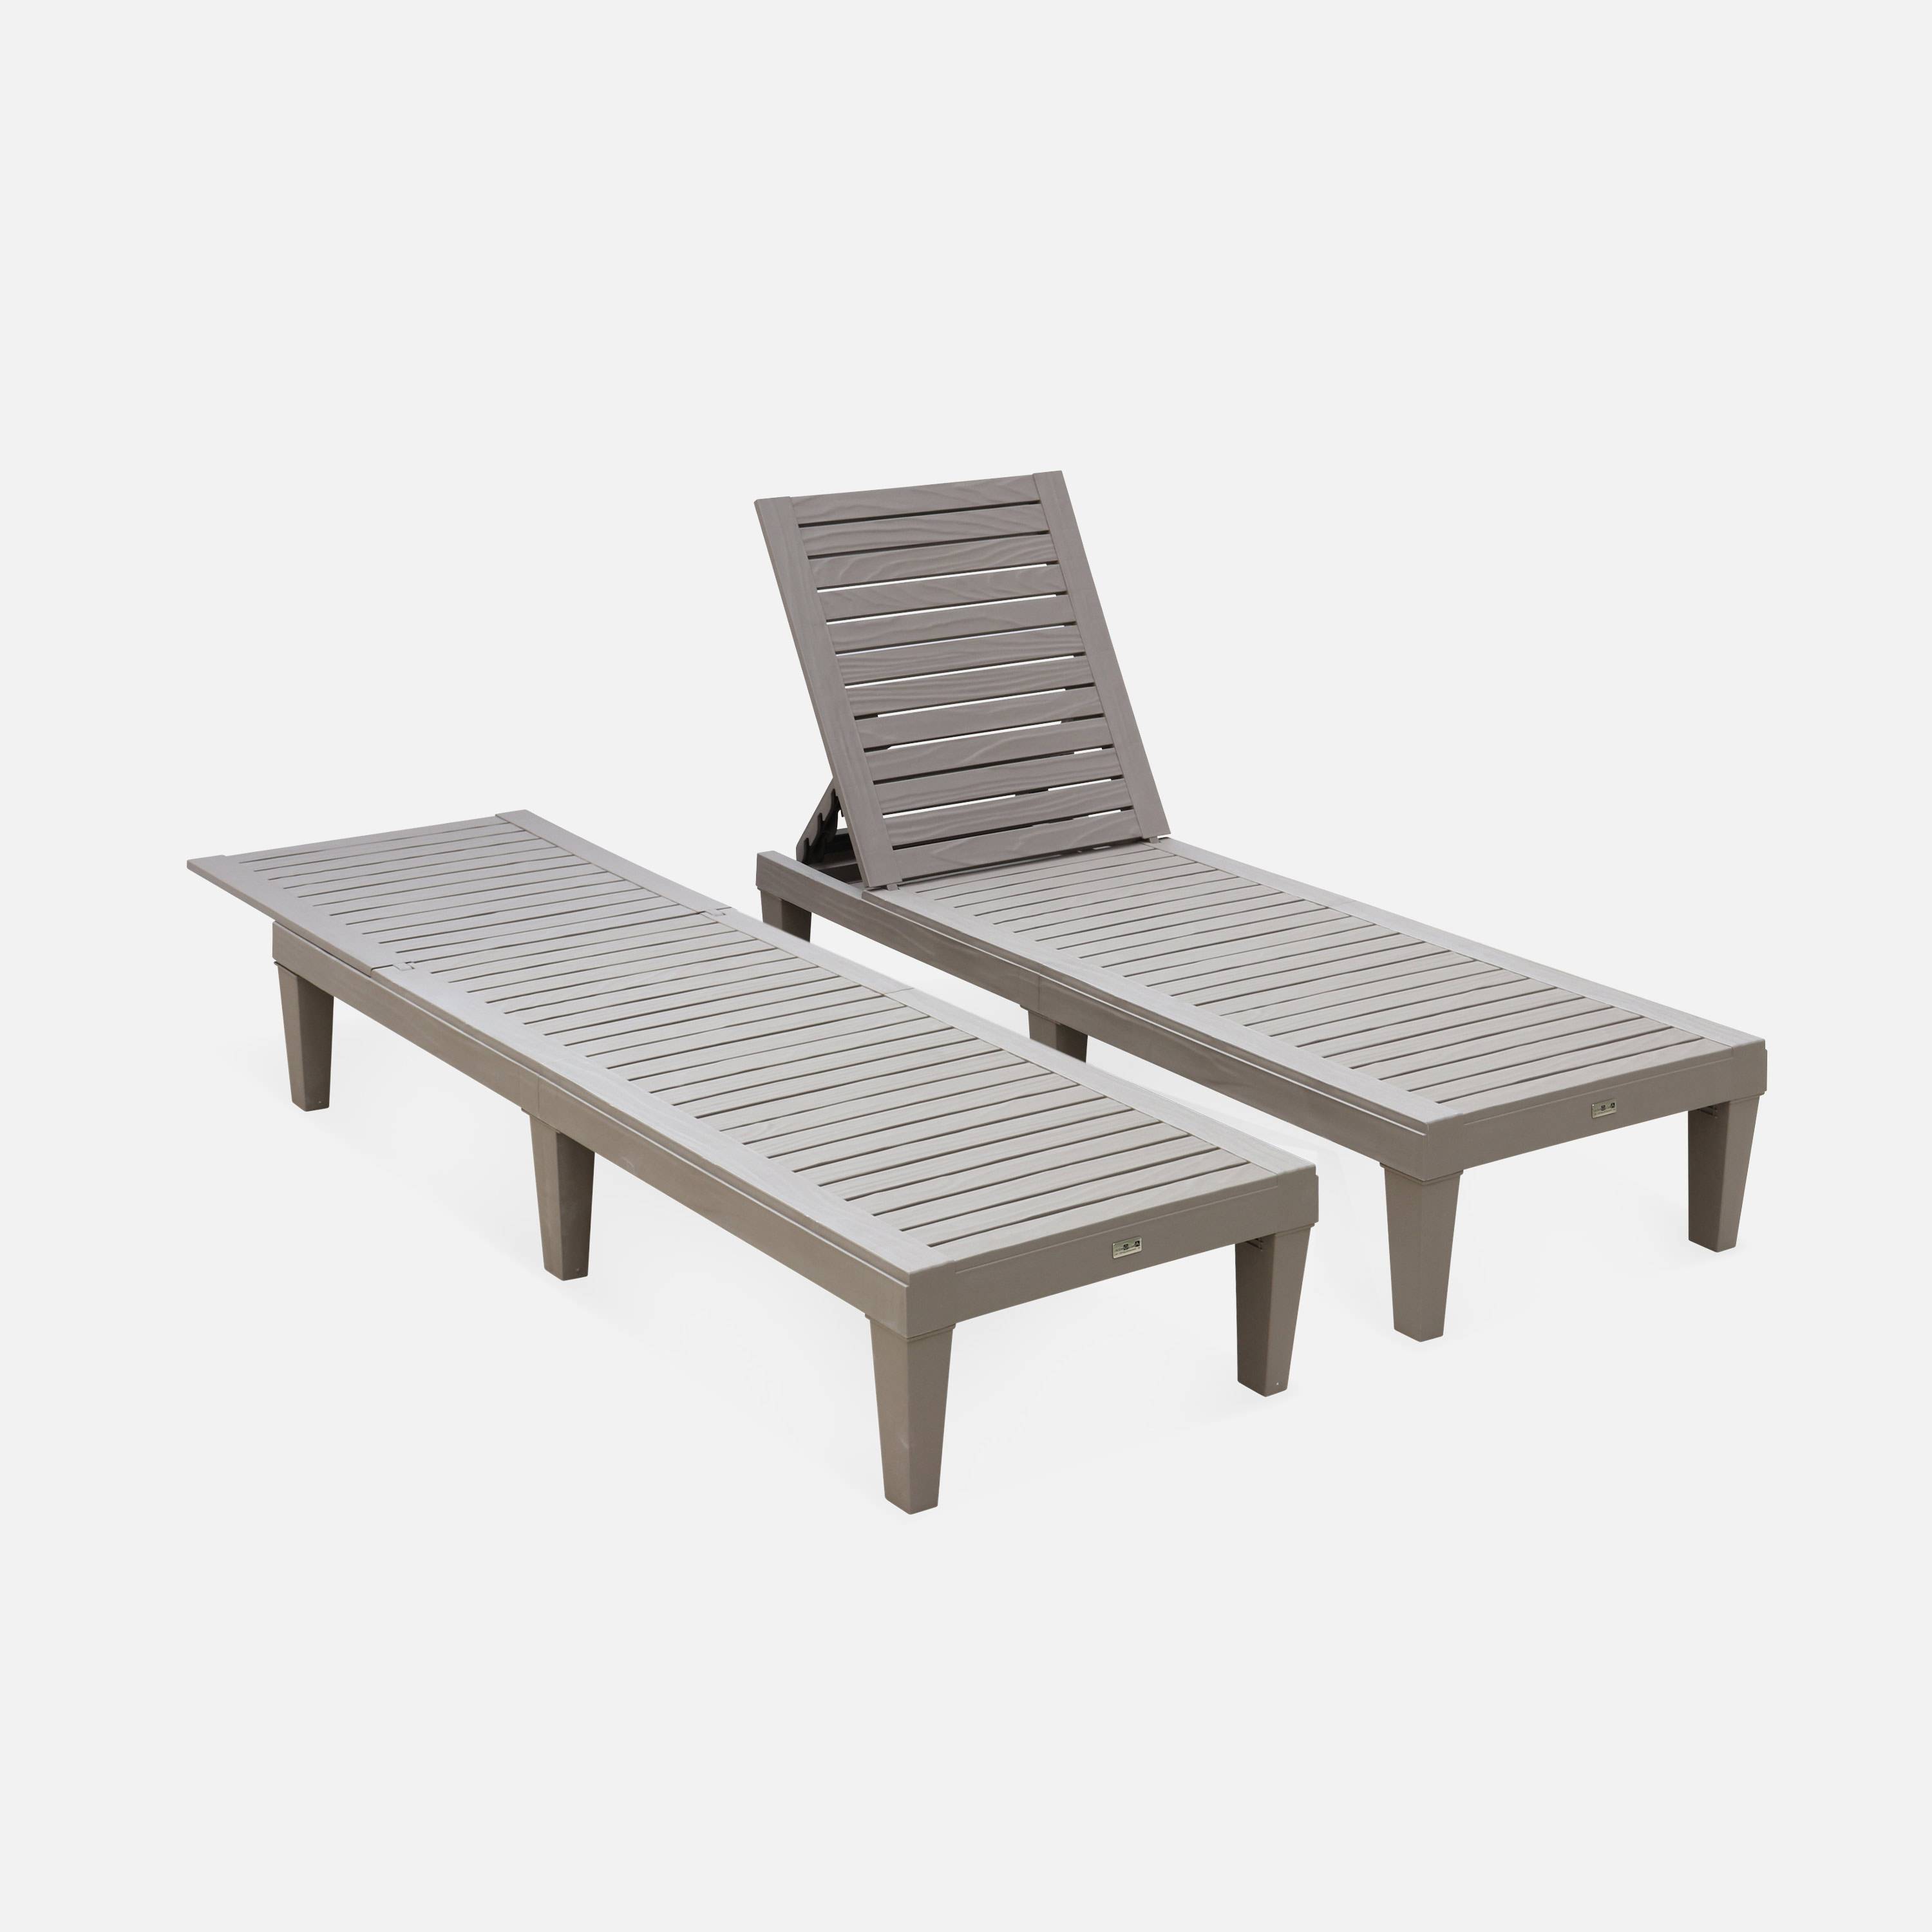 Pair of plastic loungers, multi position sun beds with textured wood effect - Pia - Grey,sweeek,Photo4